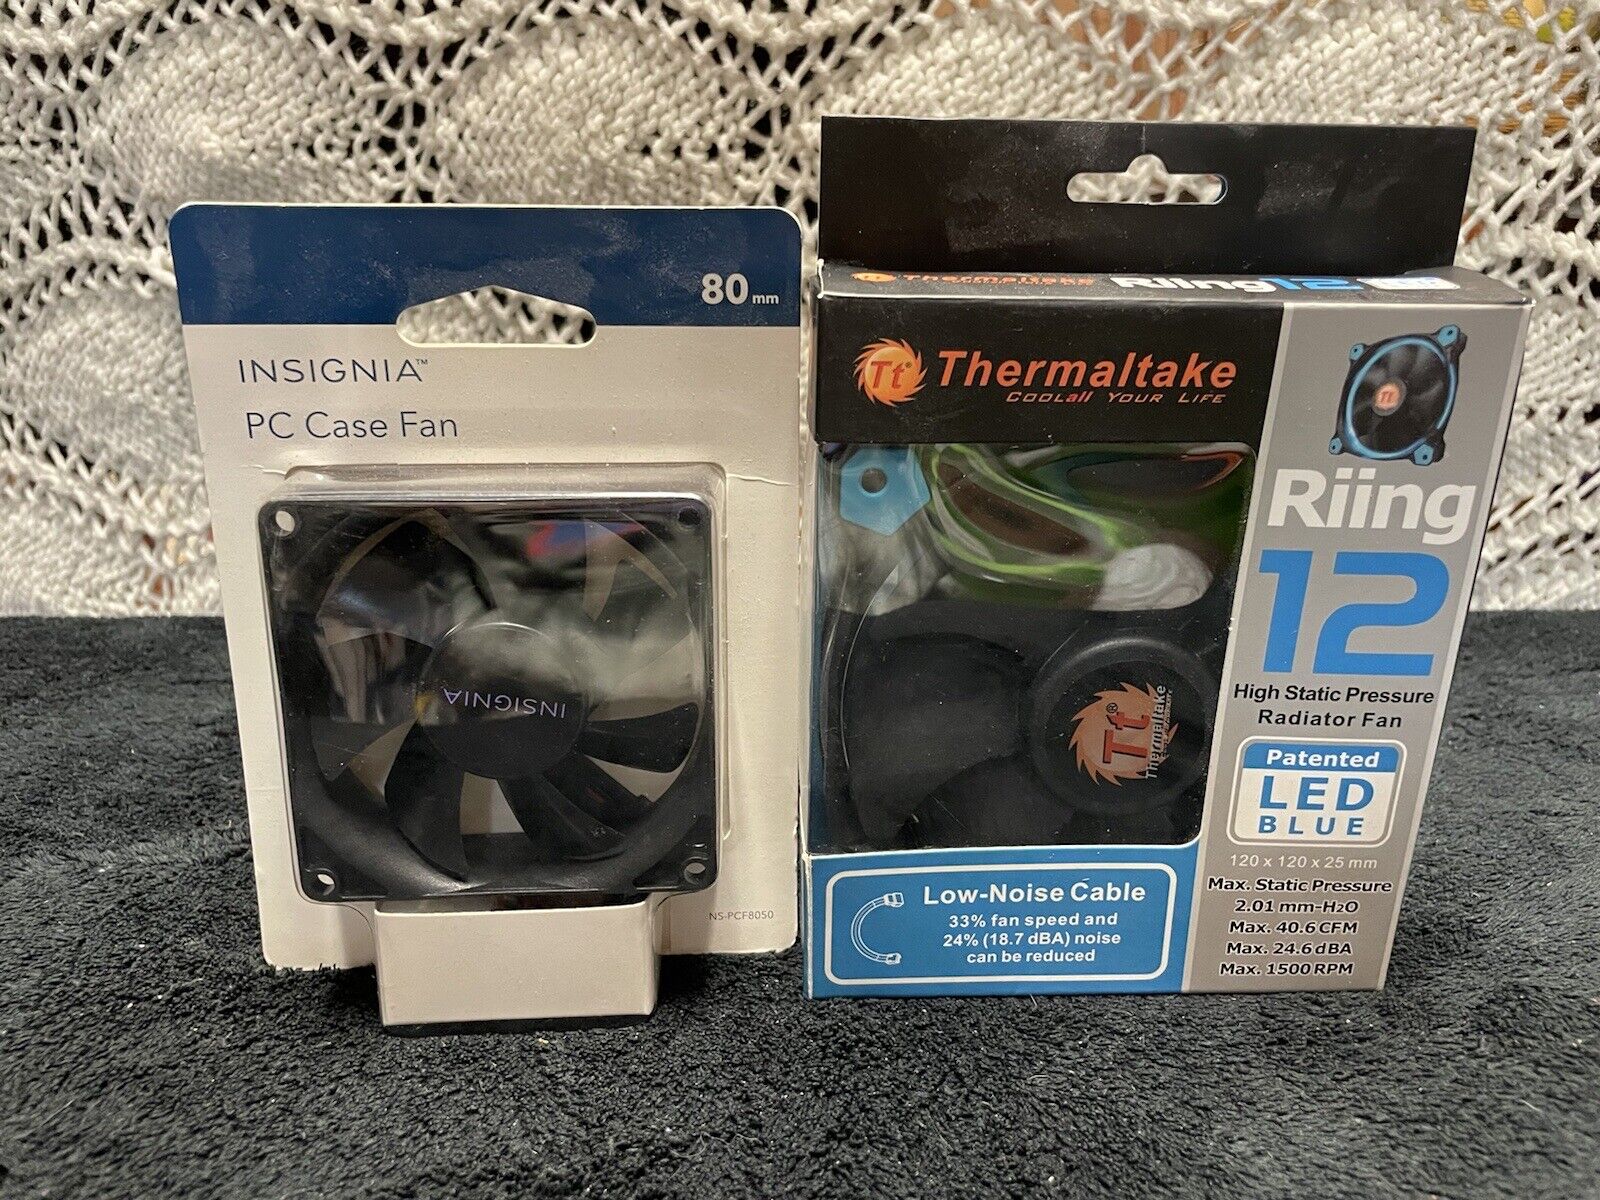 Insignia Pc Case Fan and Thermaltake Riing 12 LED Blue Pc Fan Combo